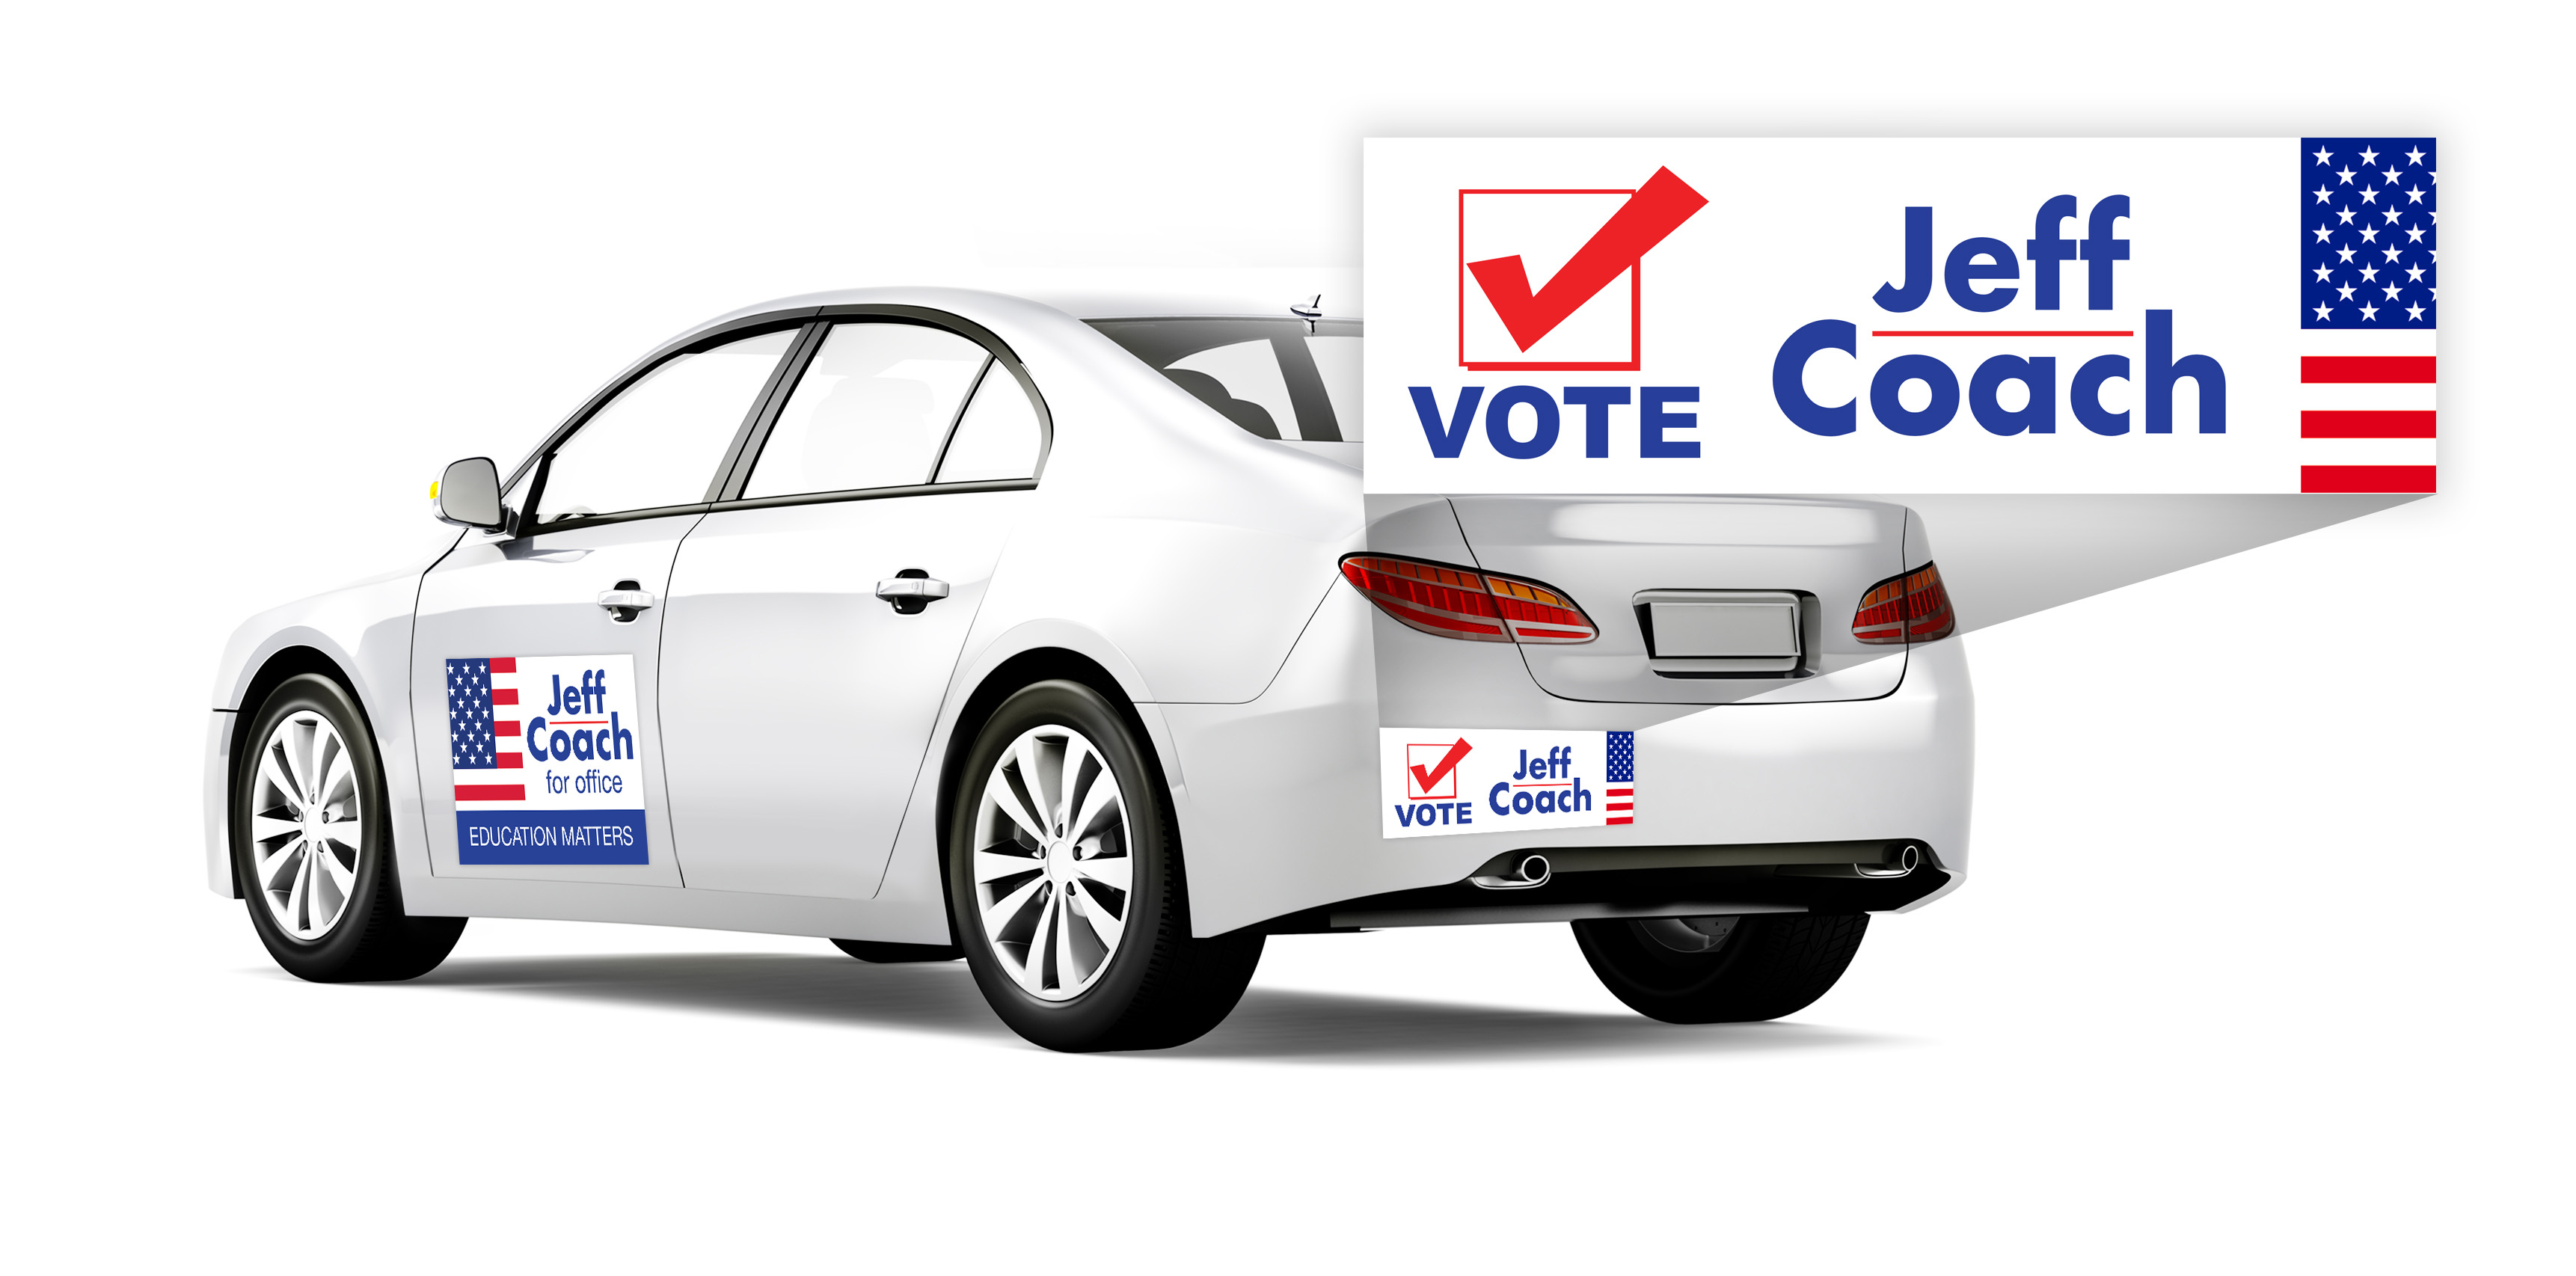 Campaign Decal Signage | LawnSigns.com